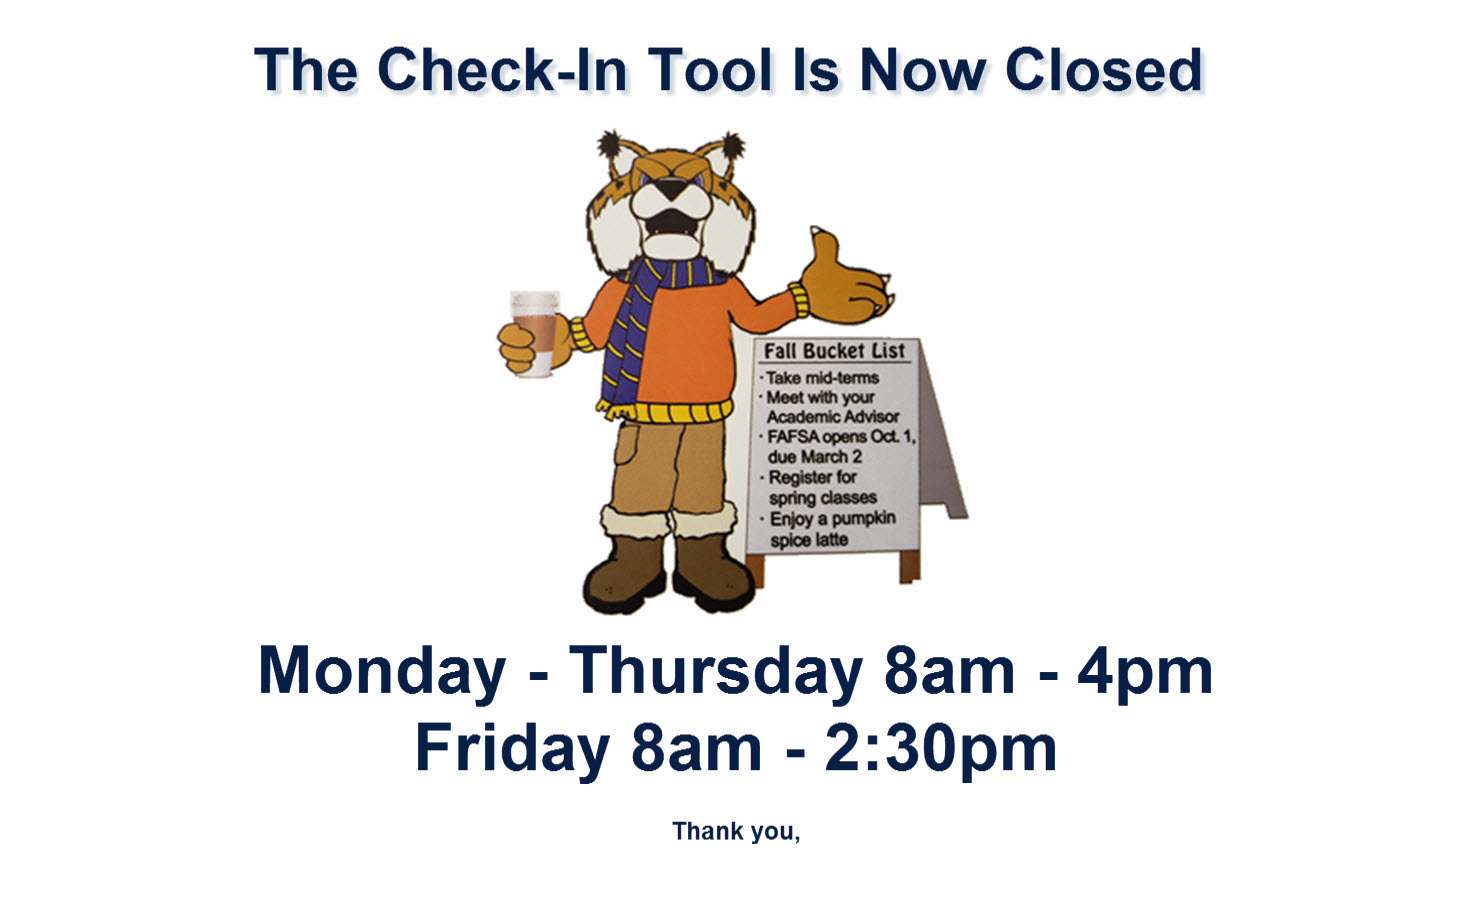 Check-In Tool Closed